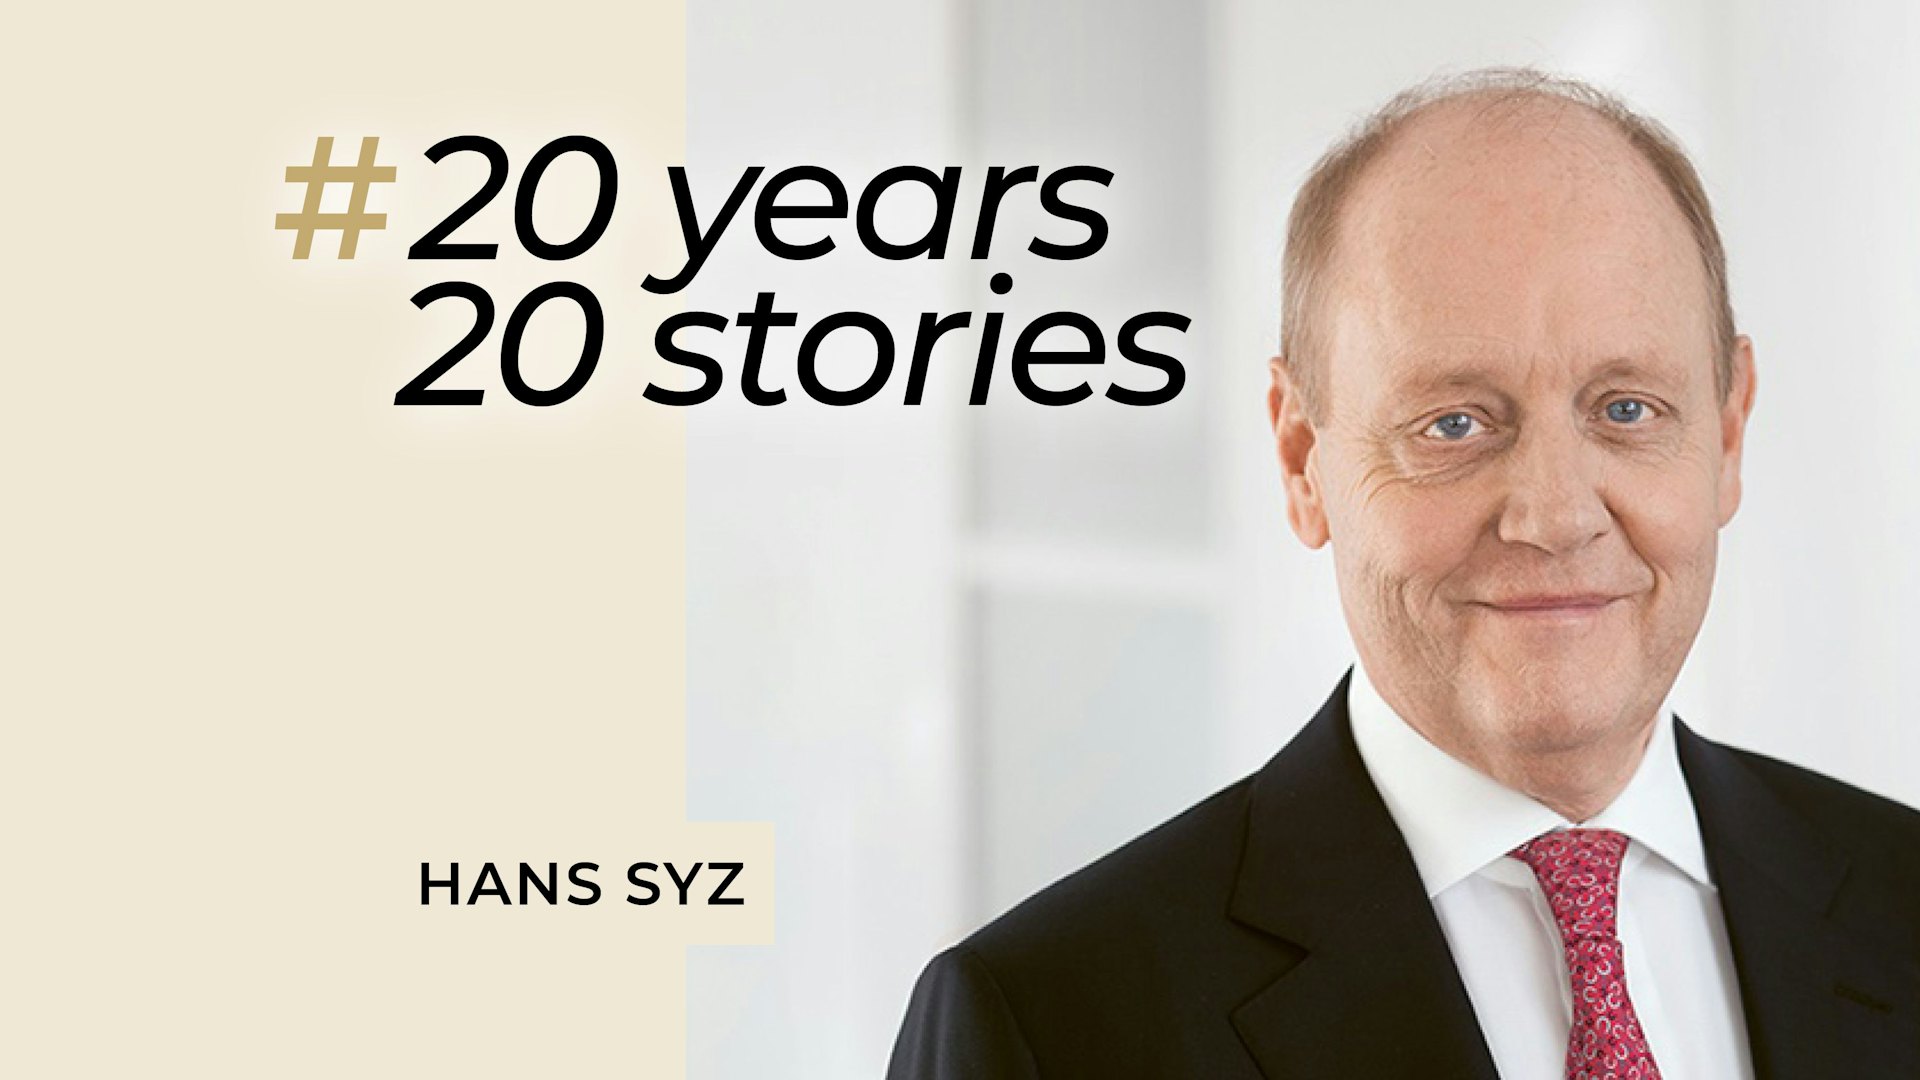 20 years, 20 stories: Hans Syz